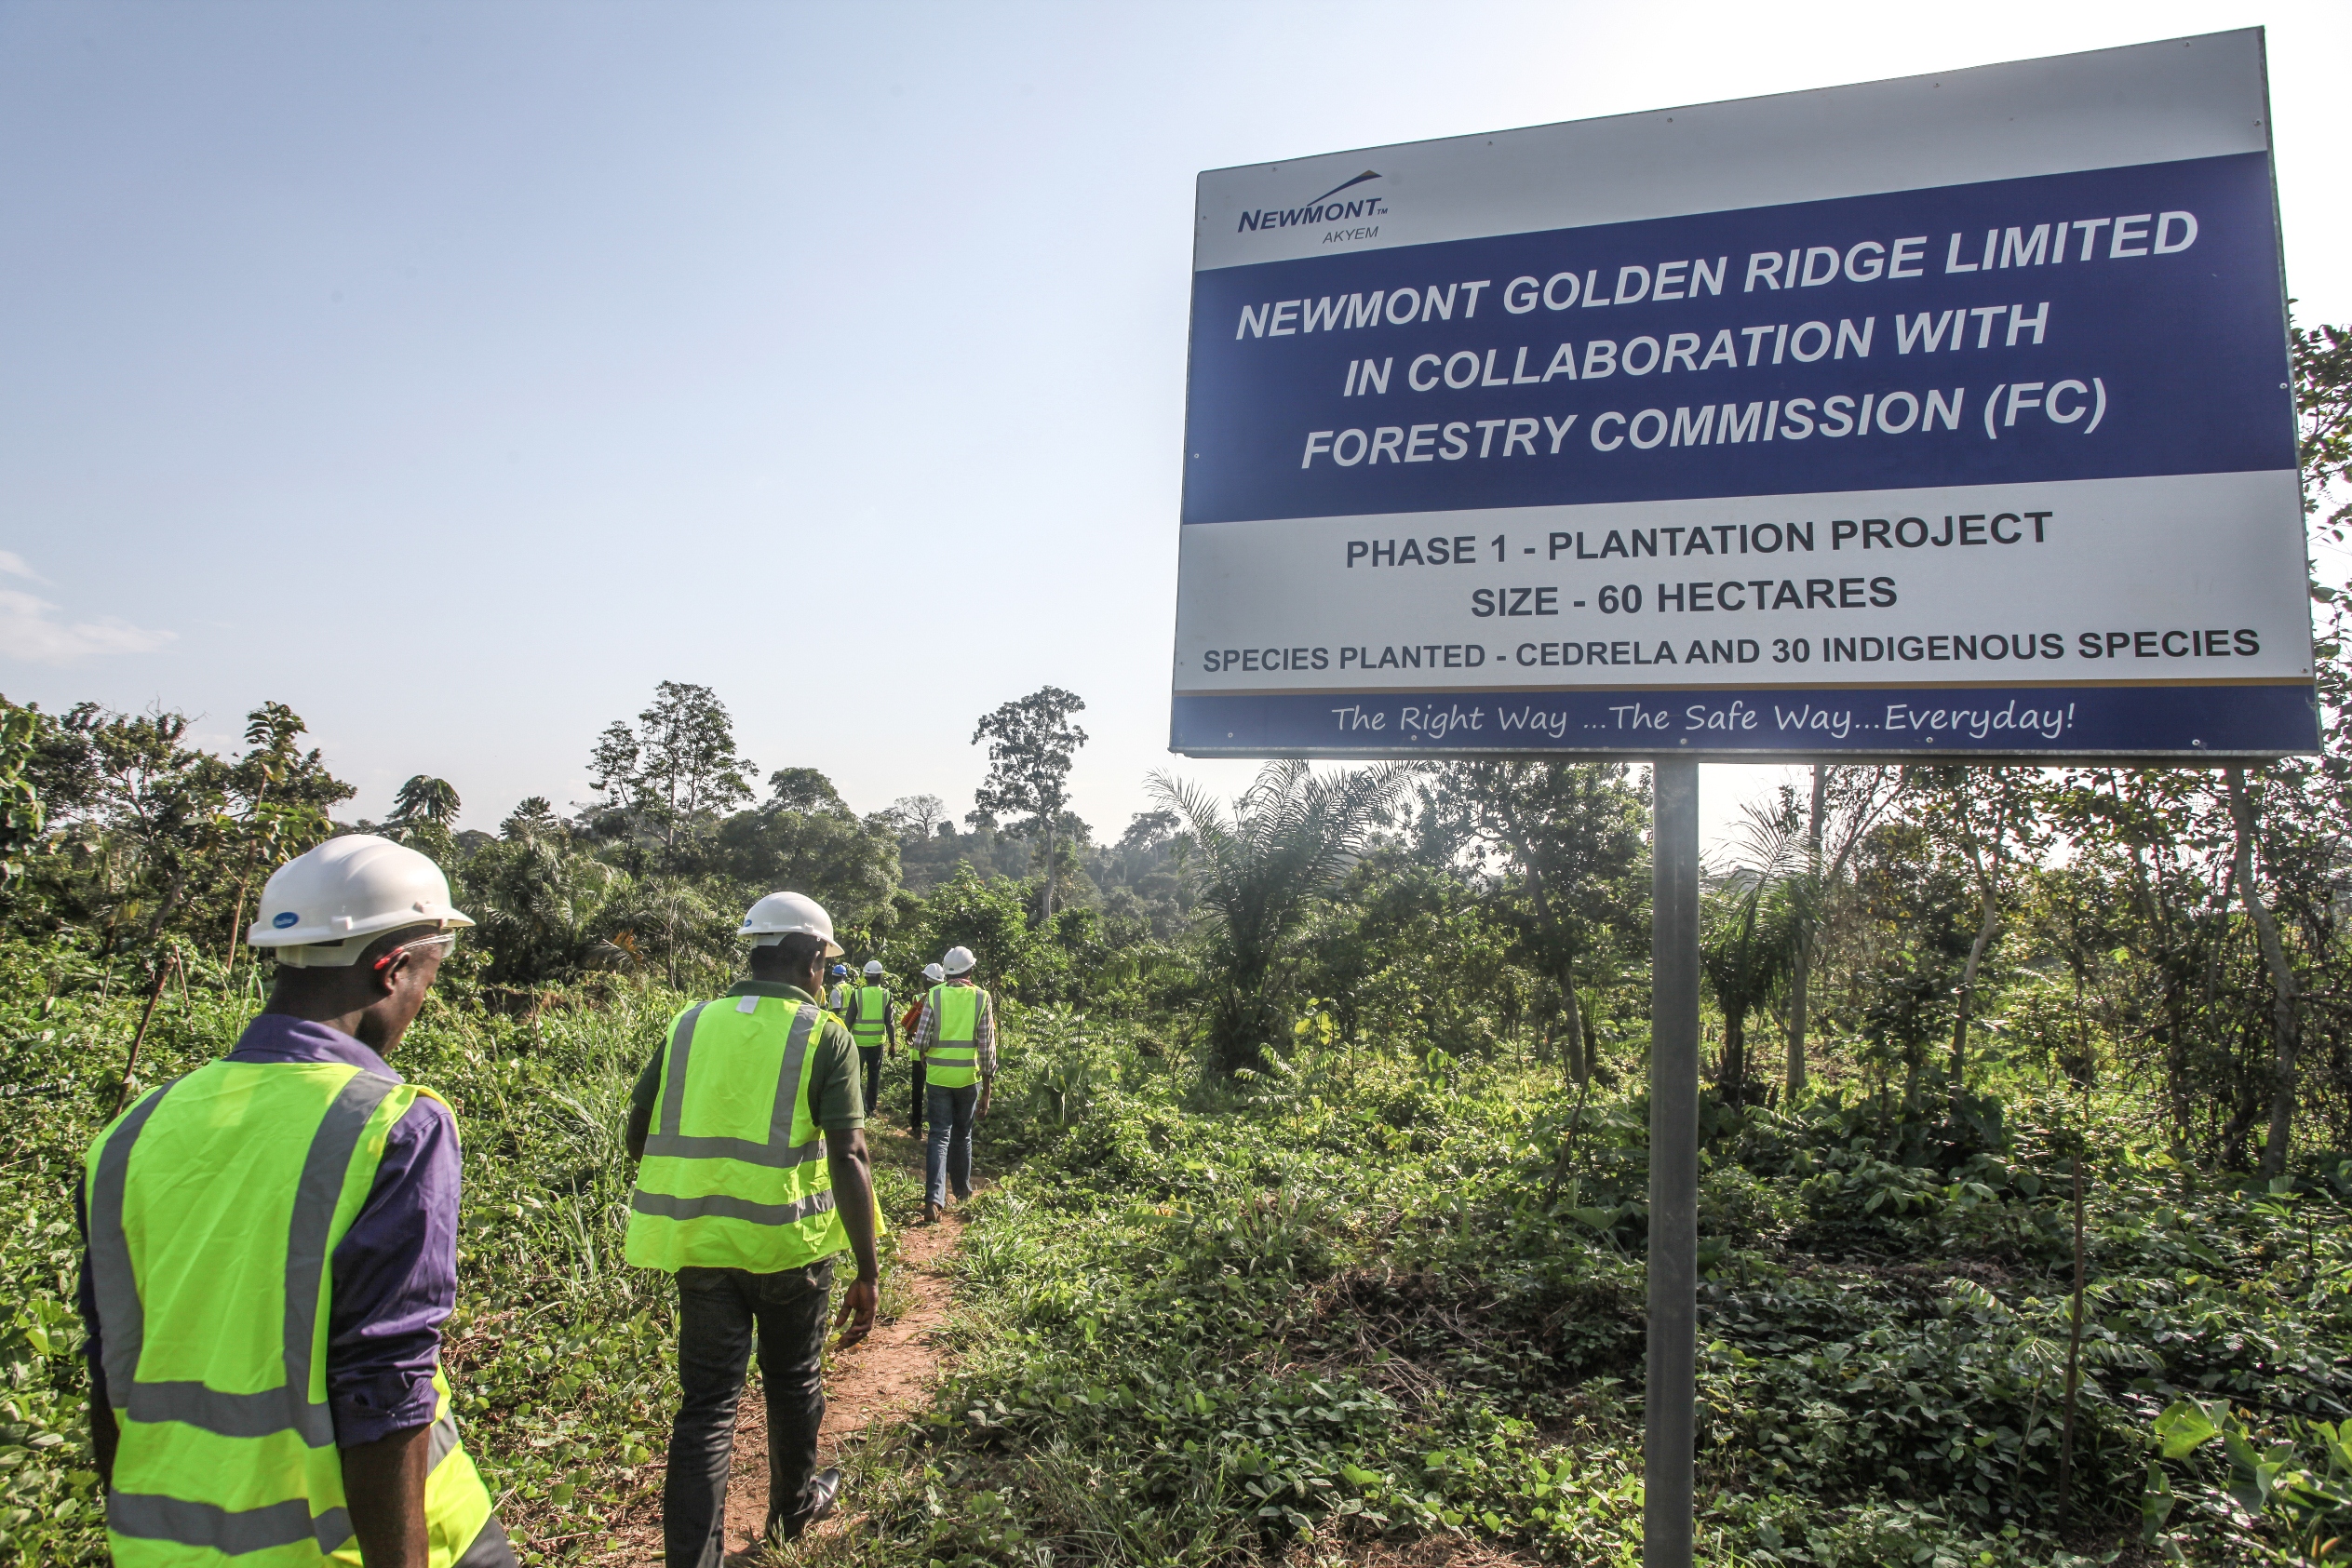 We are committed to welfare and health of communities – Newmont